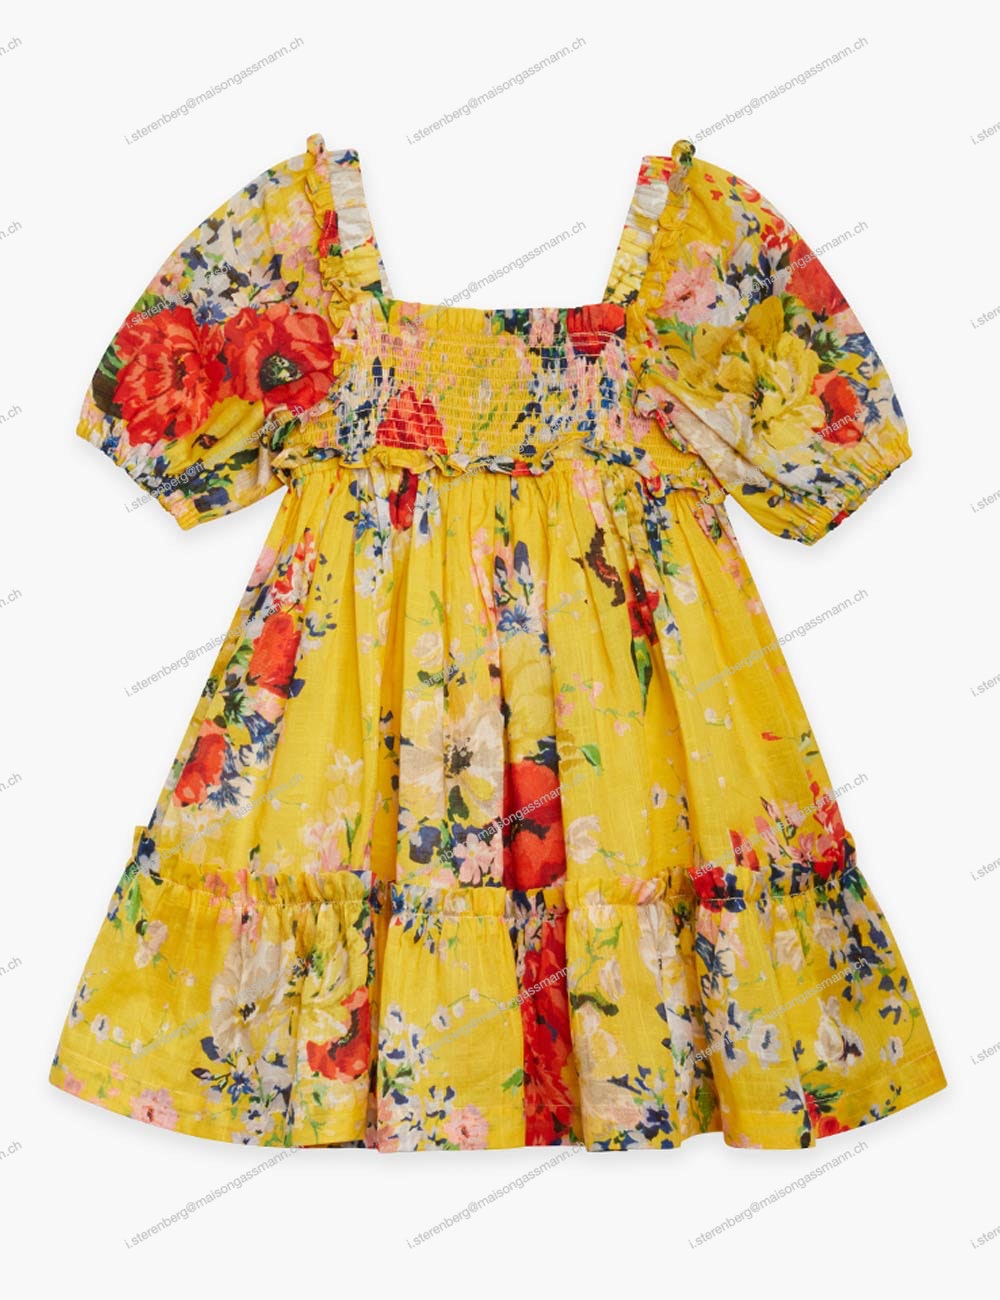 Dress with Puff Sleeve, yellow